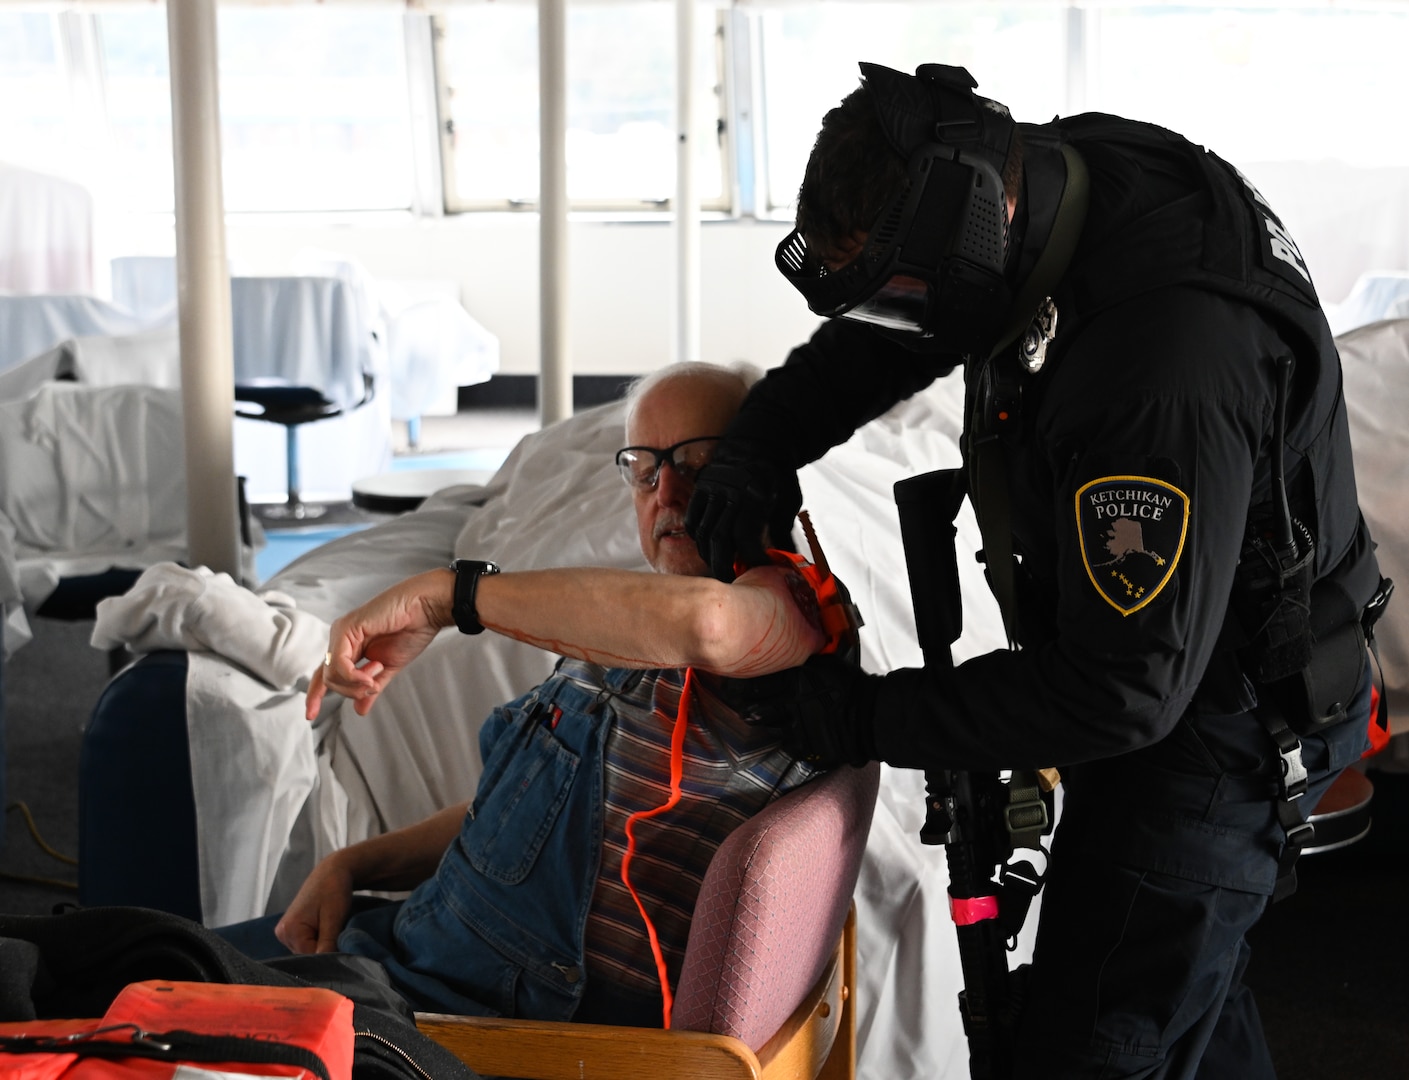 A member from the City of Ketchikan Police Department provides simulated medical treatment to a participant during a full-sale active shooter exercise aboard the Ketchikan Alaska Marine Highway System marine vessel Matanuska in Ketchikan, Alaska, April 26, 2023. The exercise is designed to improve active shooter response protocols and interagency coordination for potential emergencies. U.S. Coast Guard photo by Petty Officer Third Class Ian Gray.